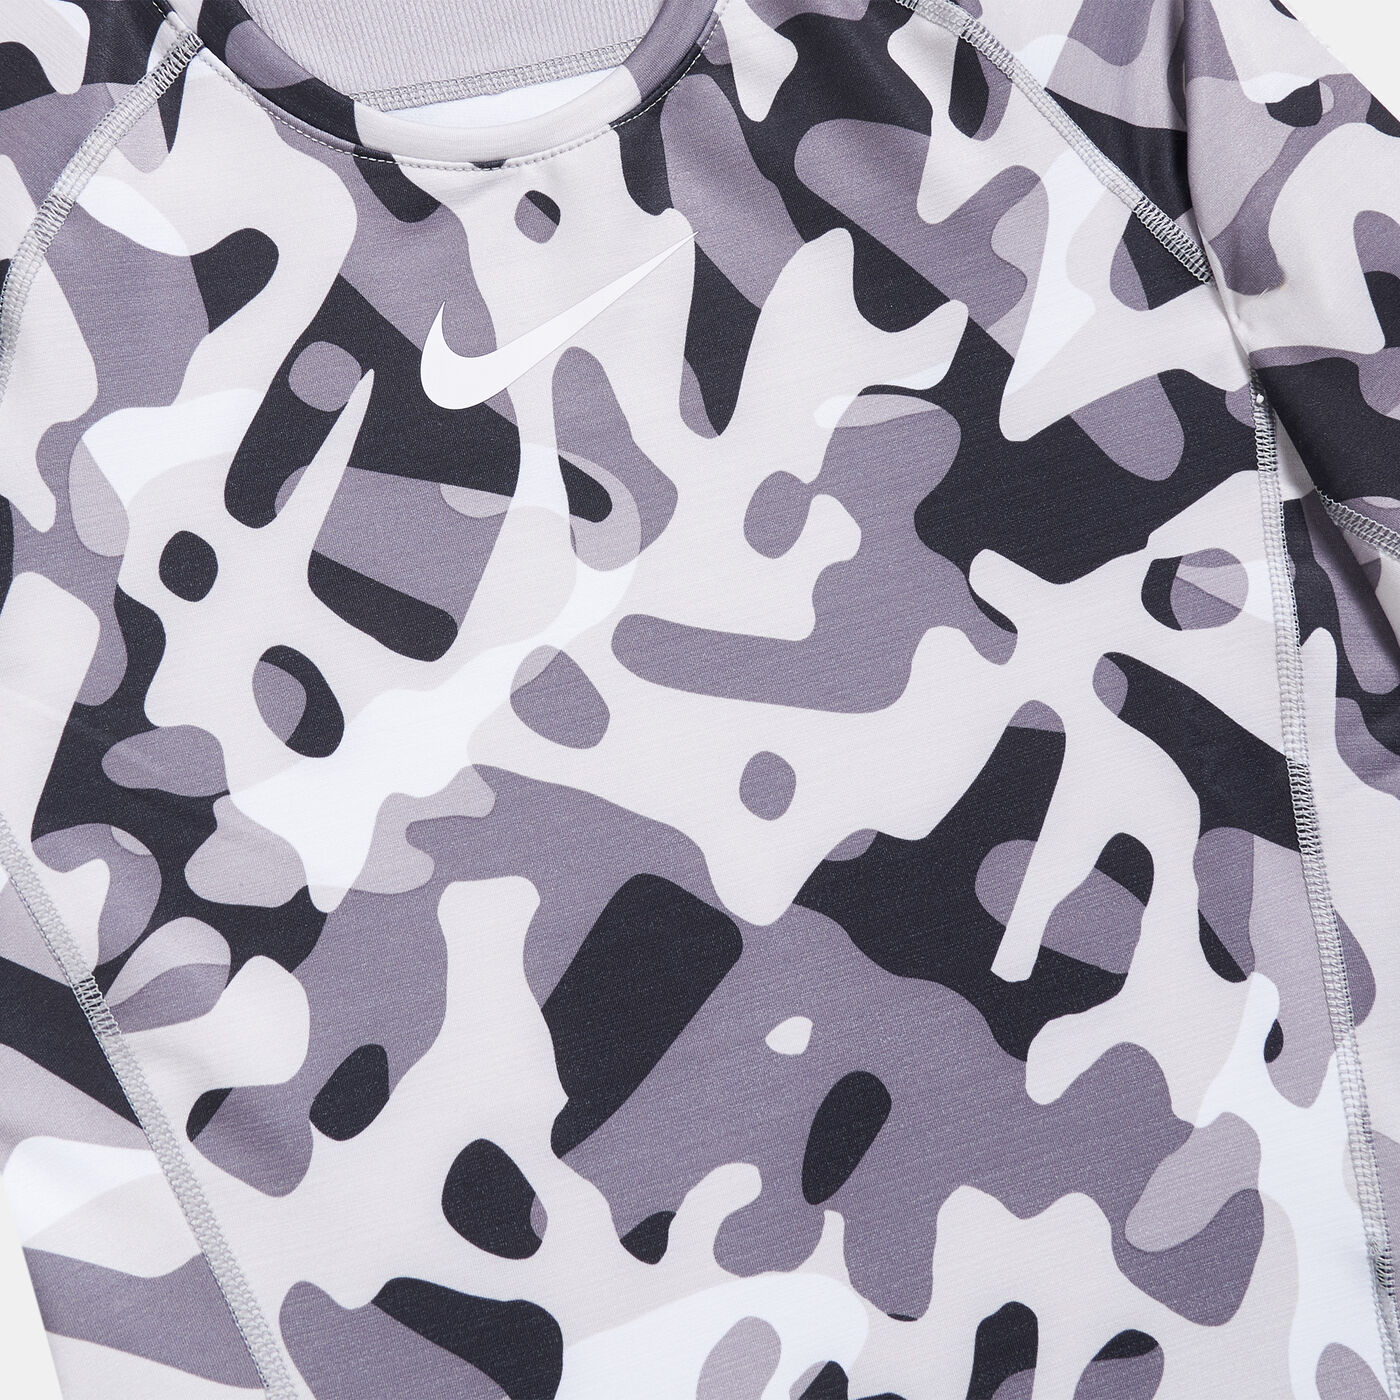 Kids' Pro Therma Allover Camo T-Shirt (Older Kids)